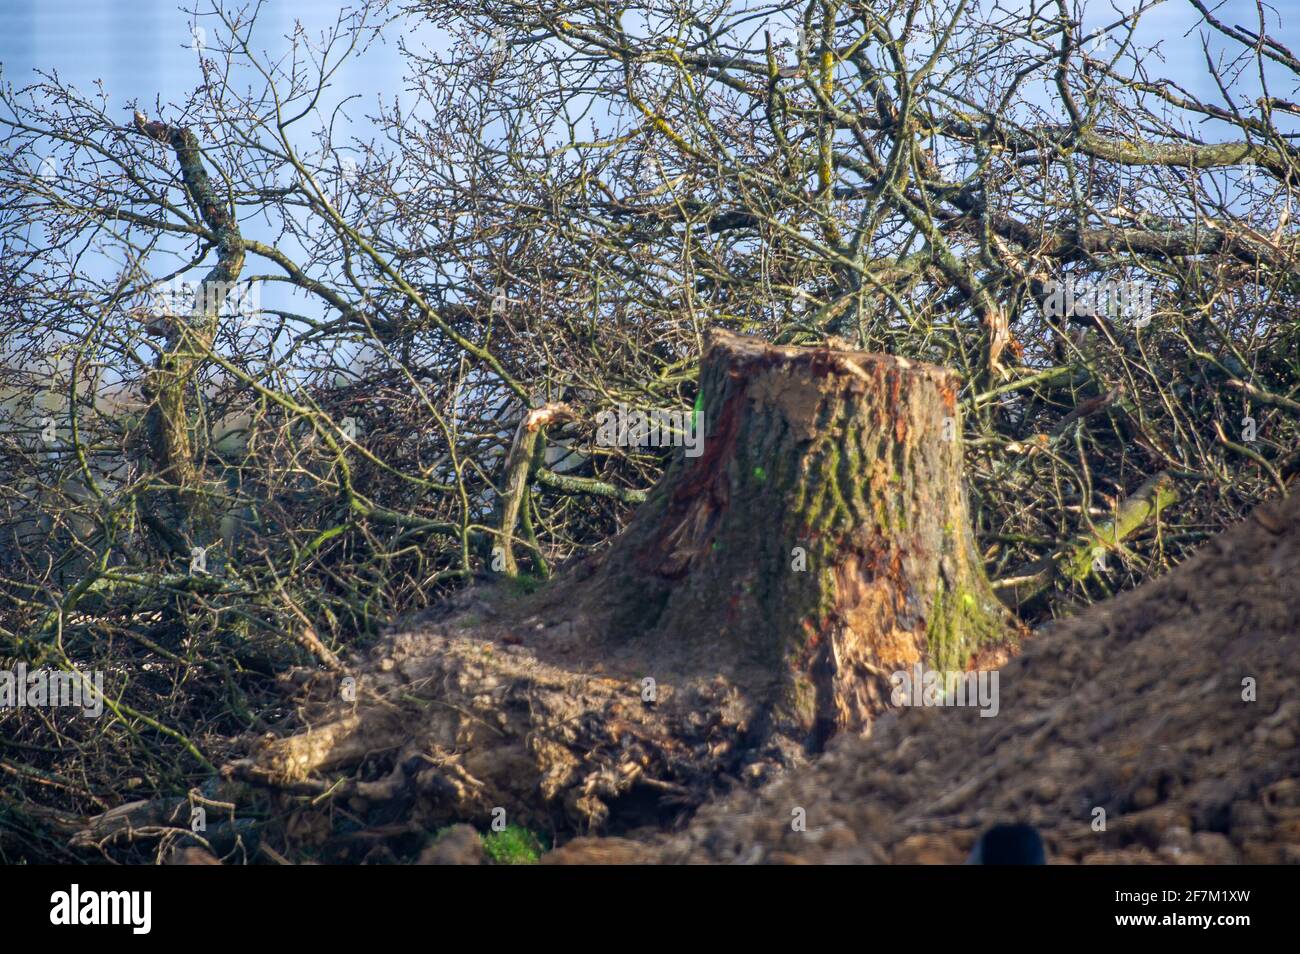 Great Missenden, UK. 3rd April, 2021. HS2 have put high security fencing in the fields next to houses near to the historical sunken holloway of Leather Lane. HS2 have destroyed a number of iconic and much loved oak trees as well as ancient hedgerows along Leather Lane. HS2 will be felling more oaks off Leather Lane too. HS2 Security are in the fields next to the oaks 24/7 and intimidating local residents and members of the public. The High Speed 2 rail link from London to Birmingham is carving a huge ugly scar across the Chilterns which is an AONB. Credit: Maureen McLean/Alamy Stock Photo